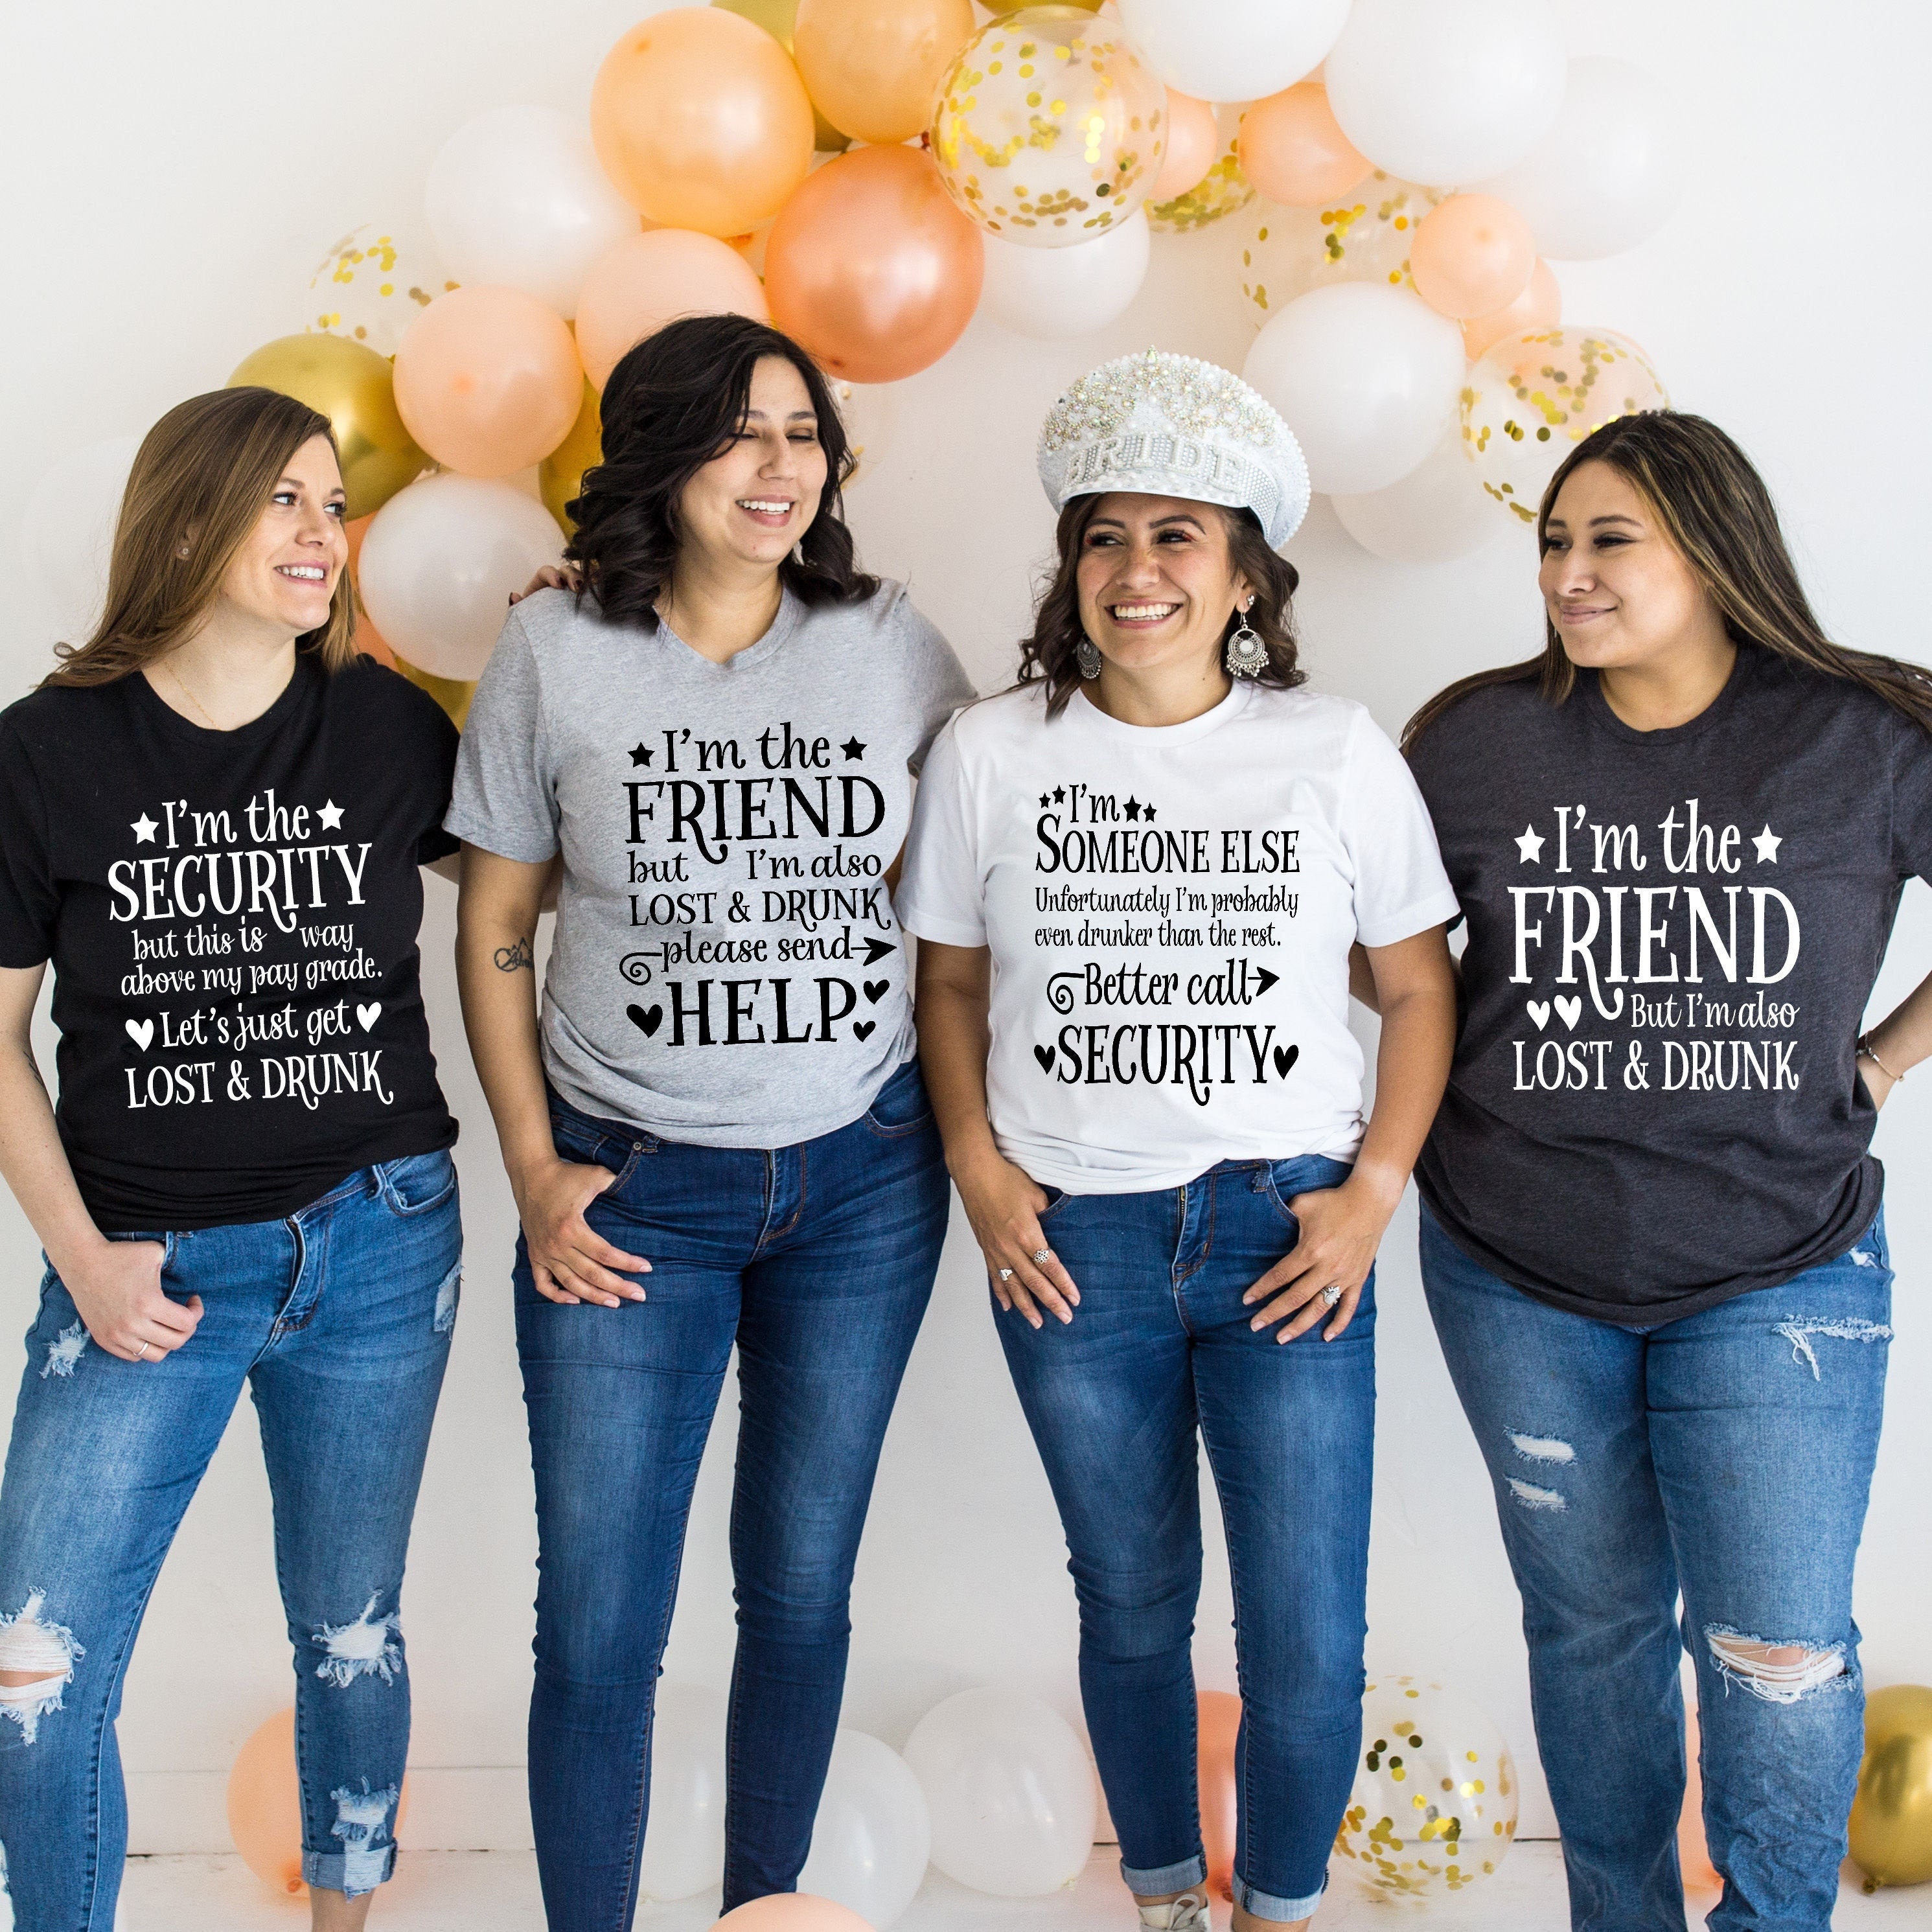 Funny Friend Group Shirts, If Lost or Drunk Please Return to Friend,  Matching Girl Group T-shirt, Girls Trip, Girls Weekend, Girls Vacation 